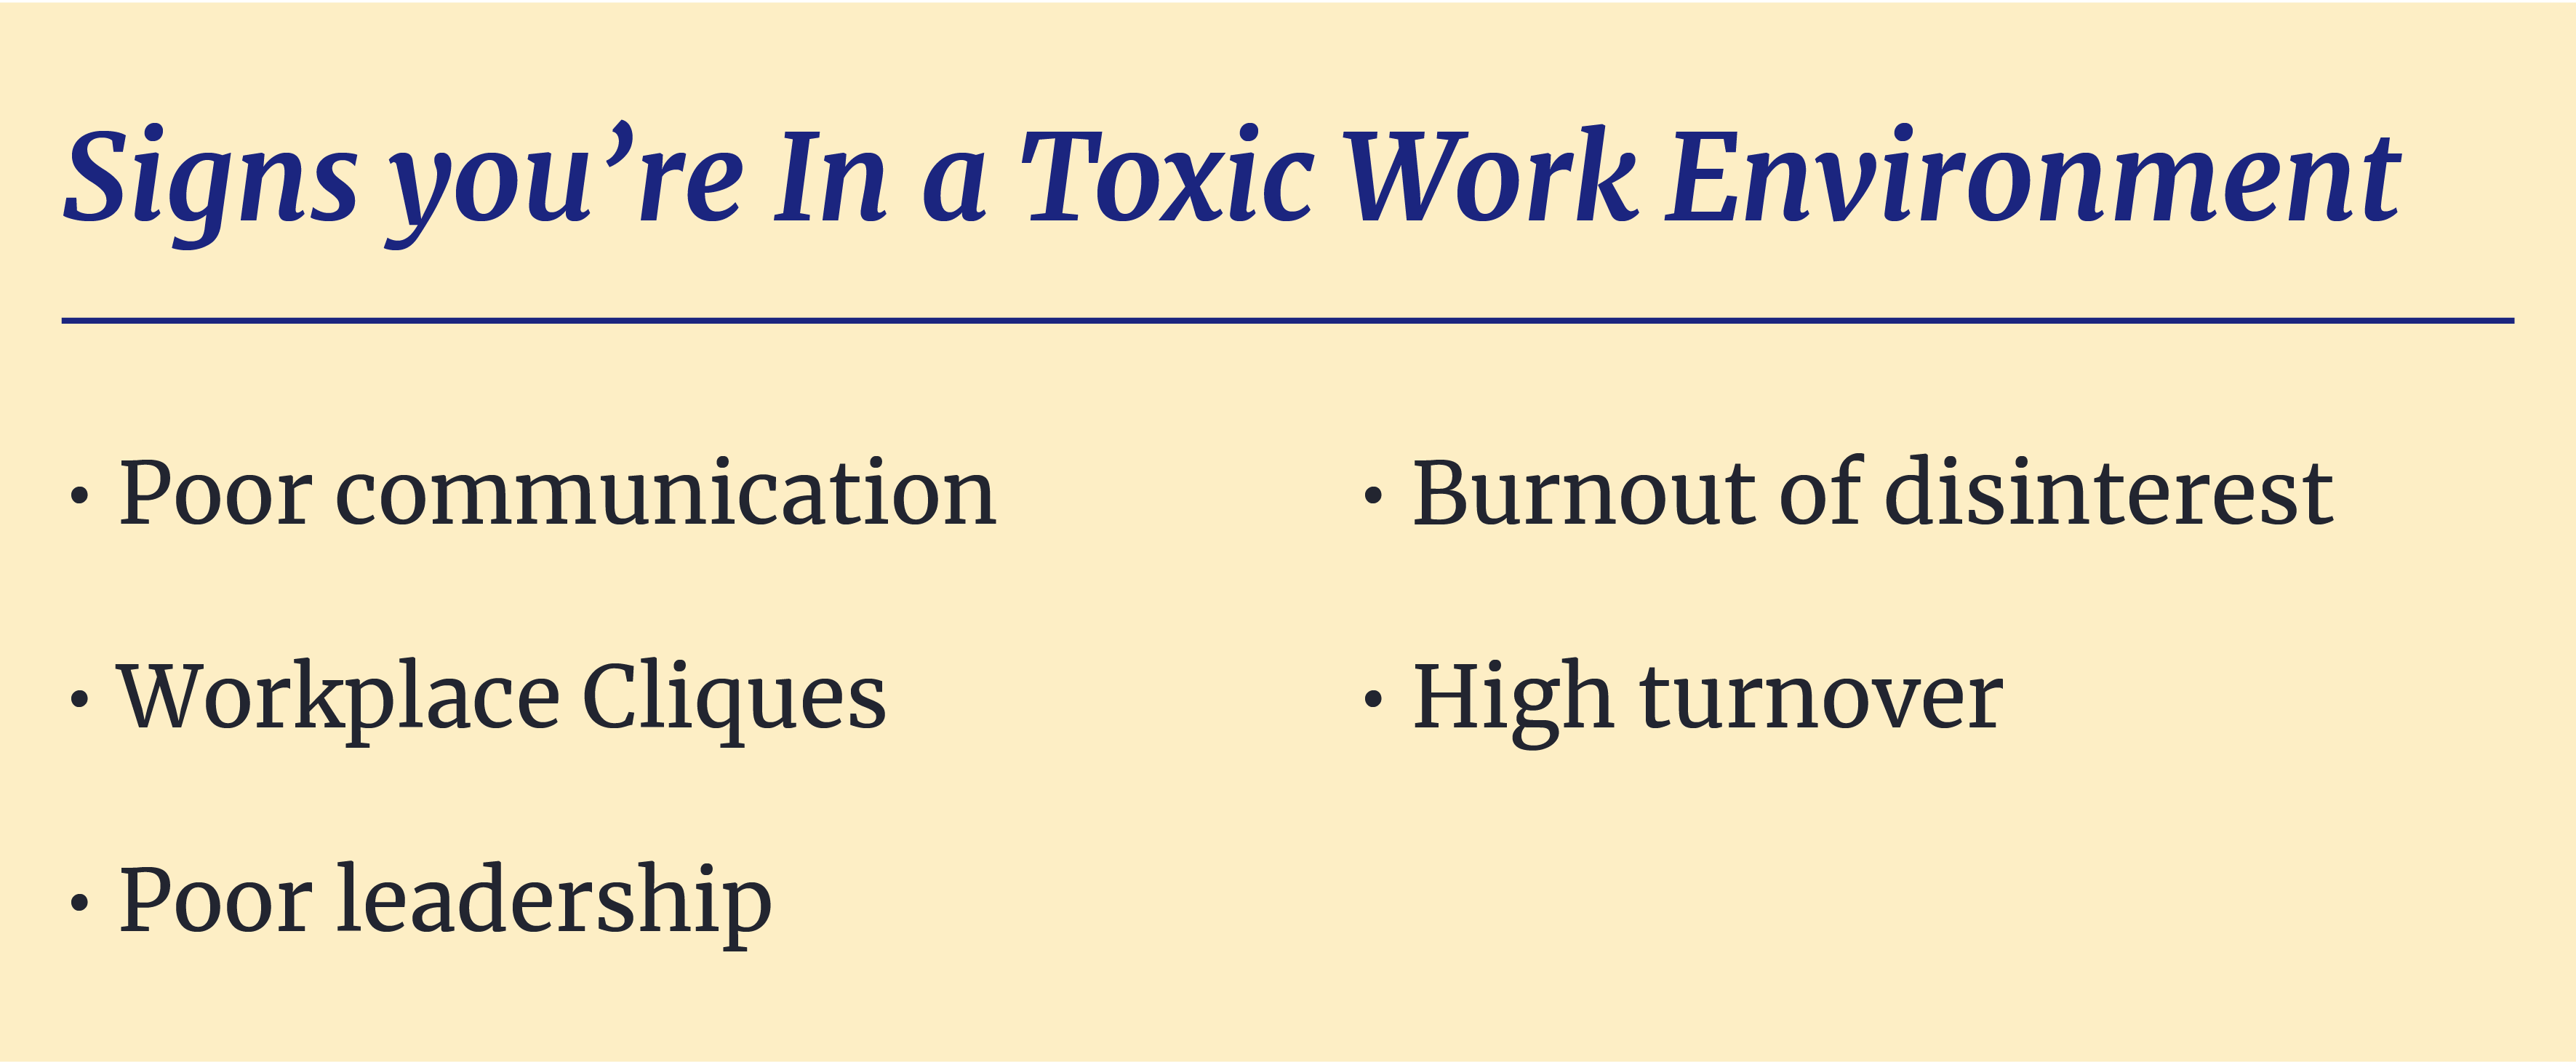 toxic work environment signs 